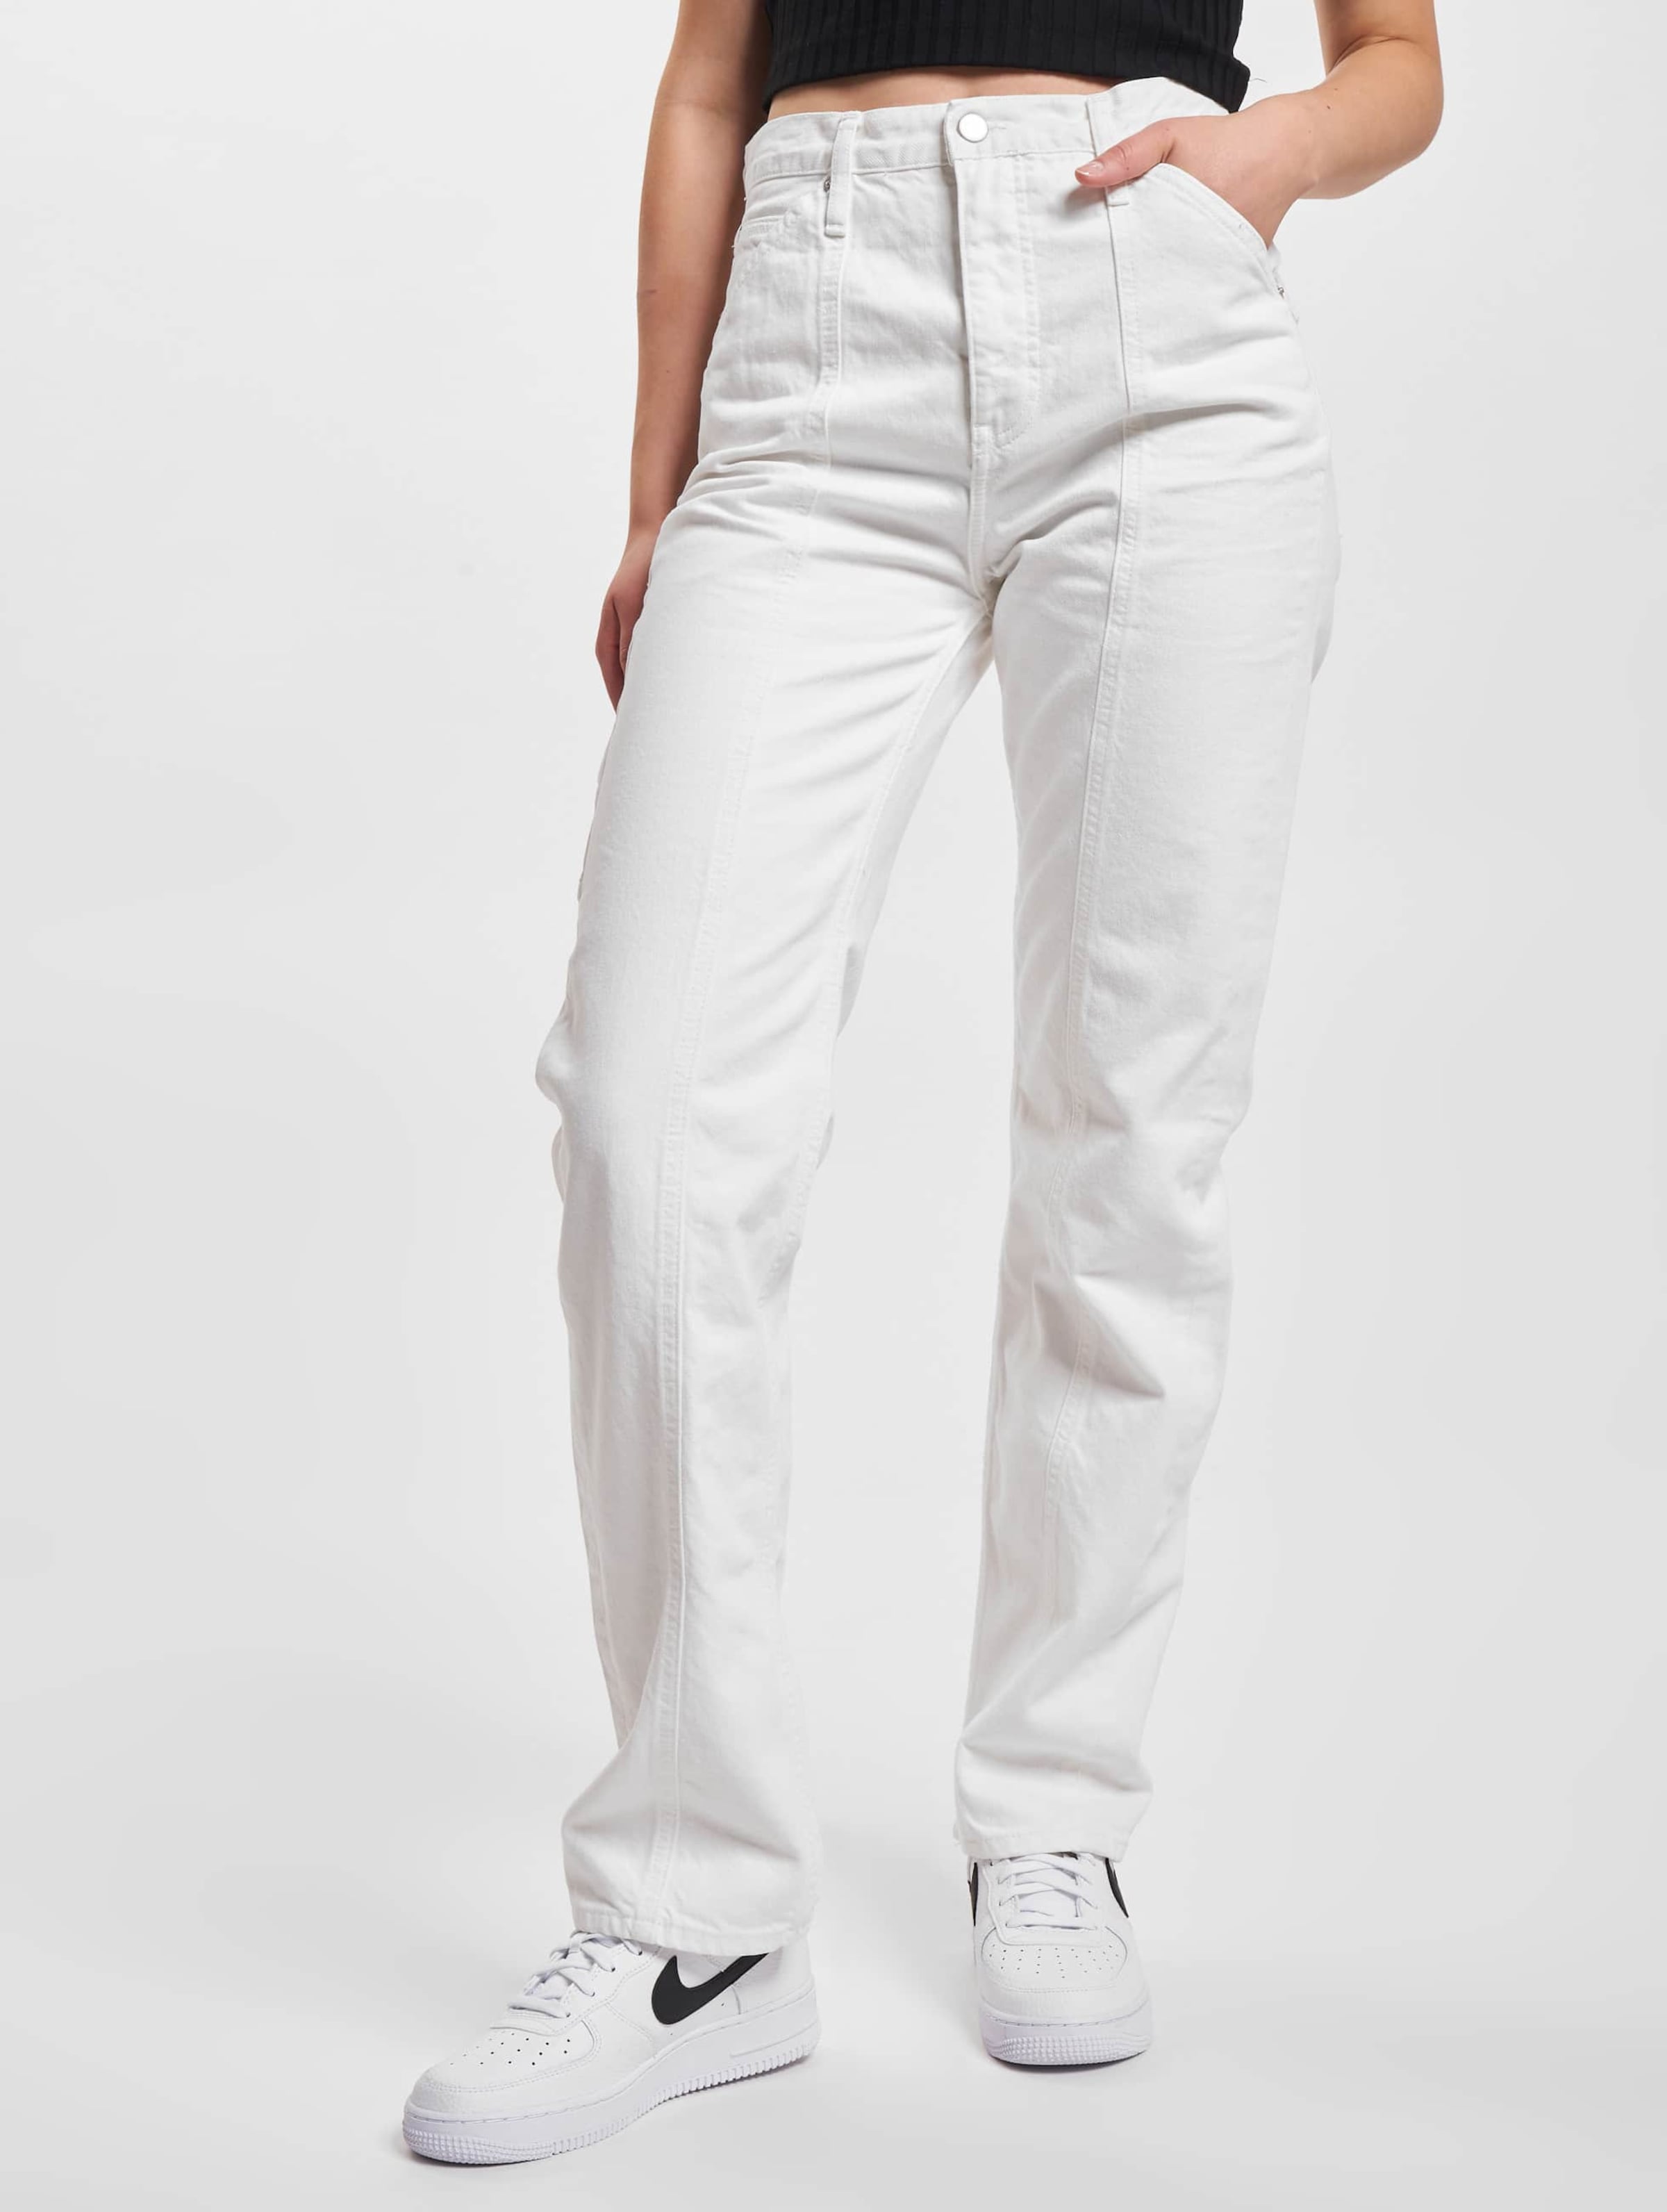 Calvin Klein Women's Everyday Ponte Fitted Pants India | Ubuy